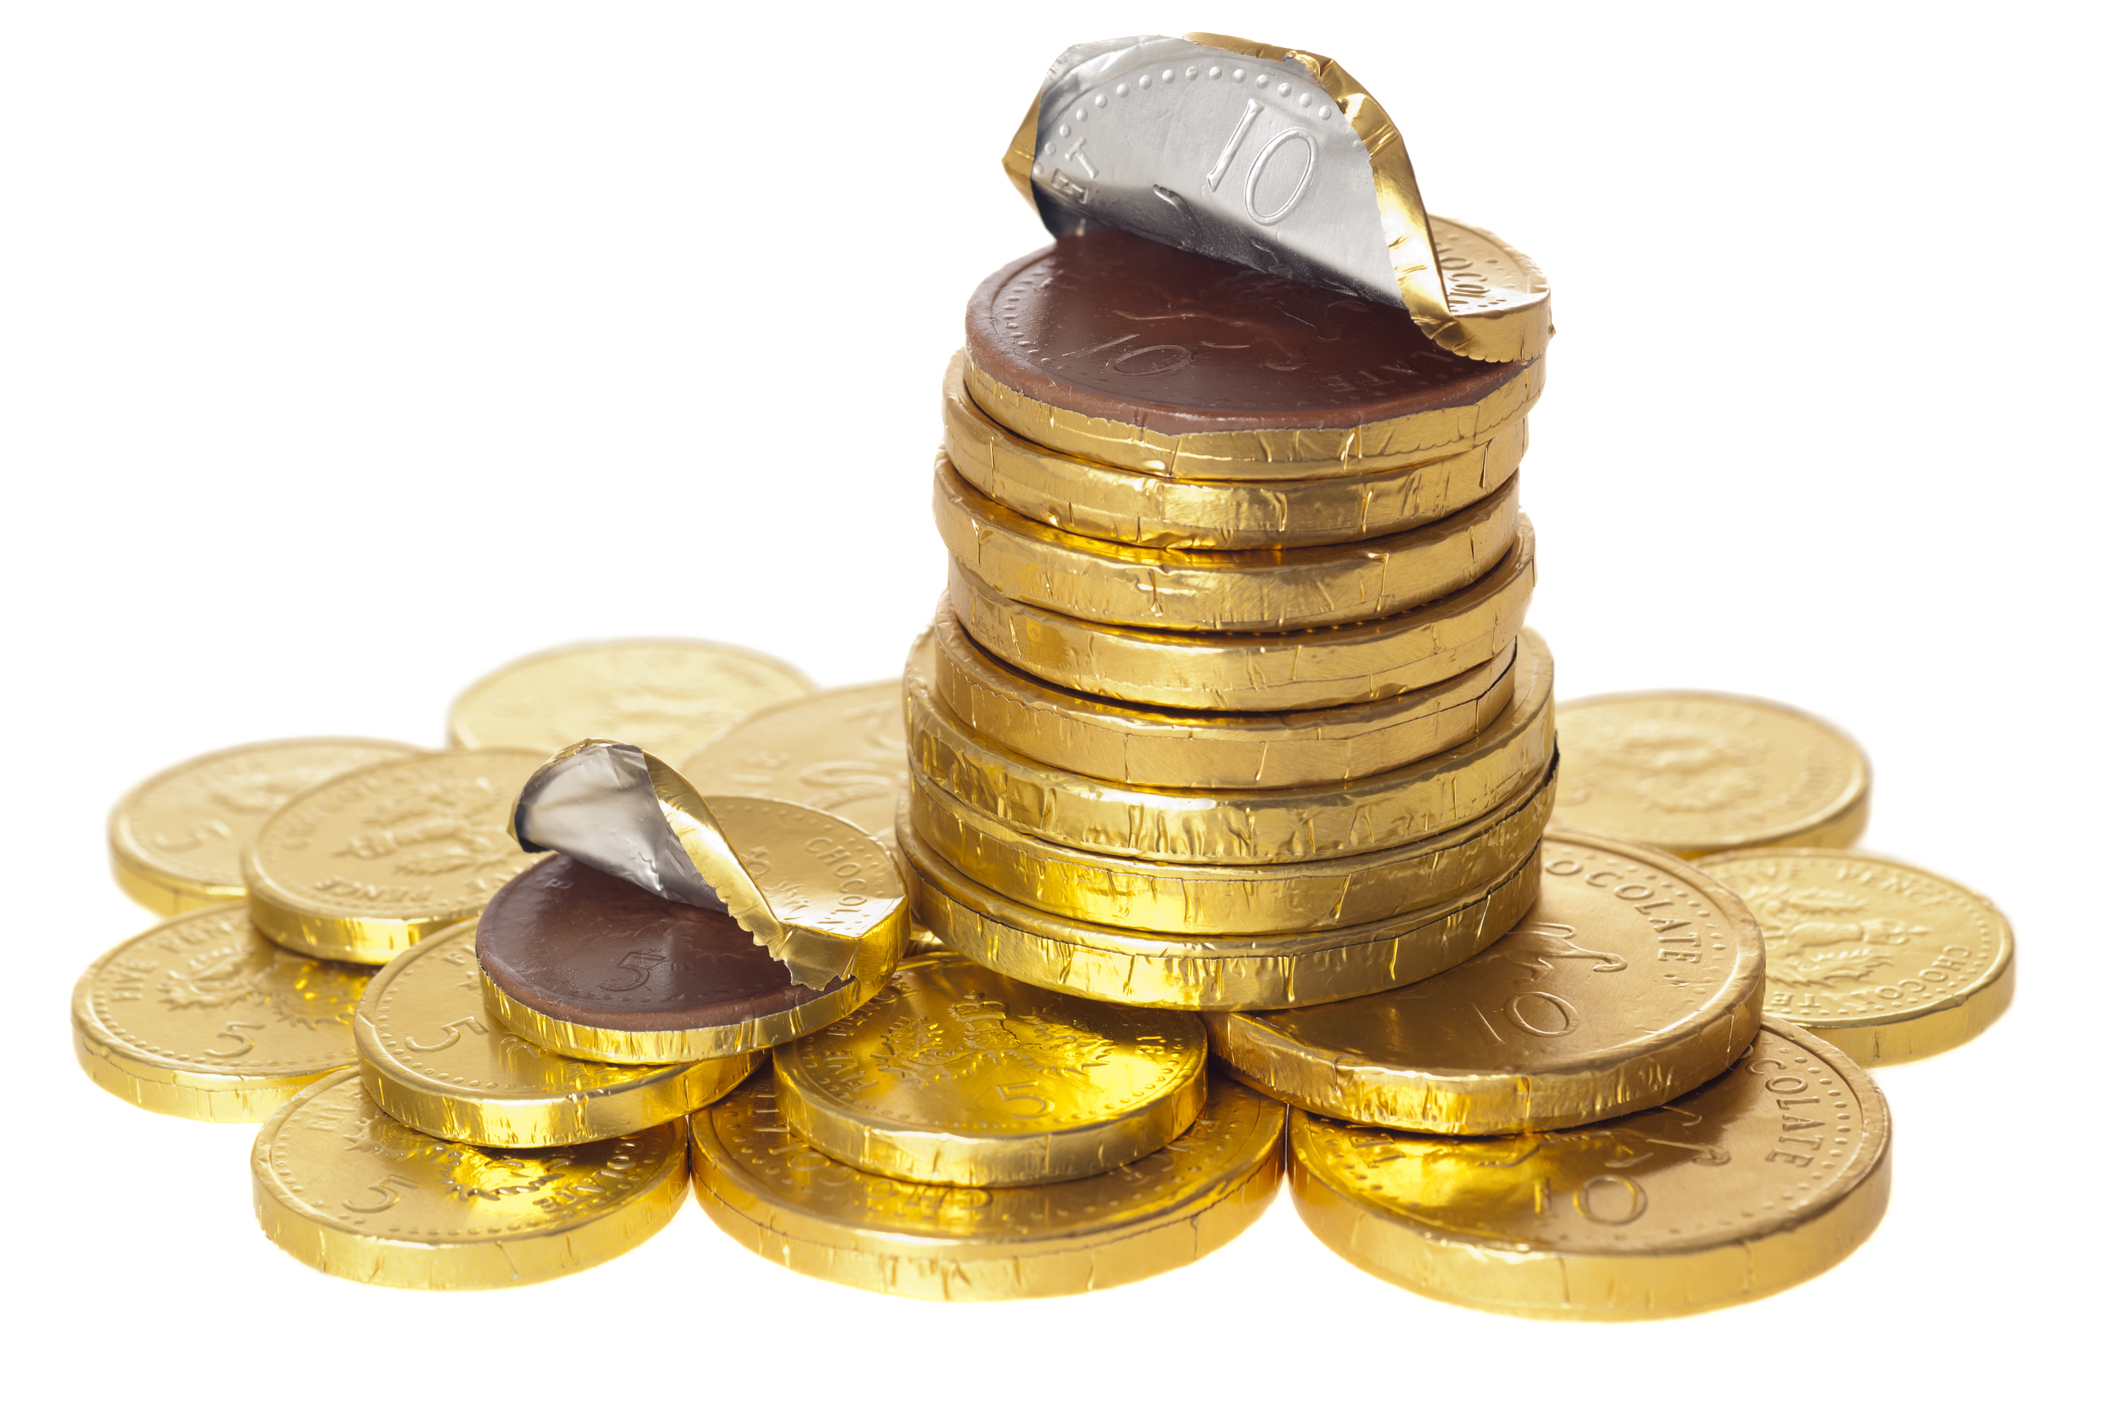 Chocolate money coins stacked on white